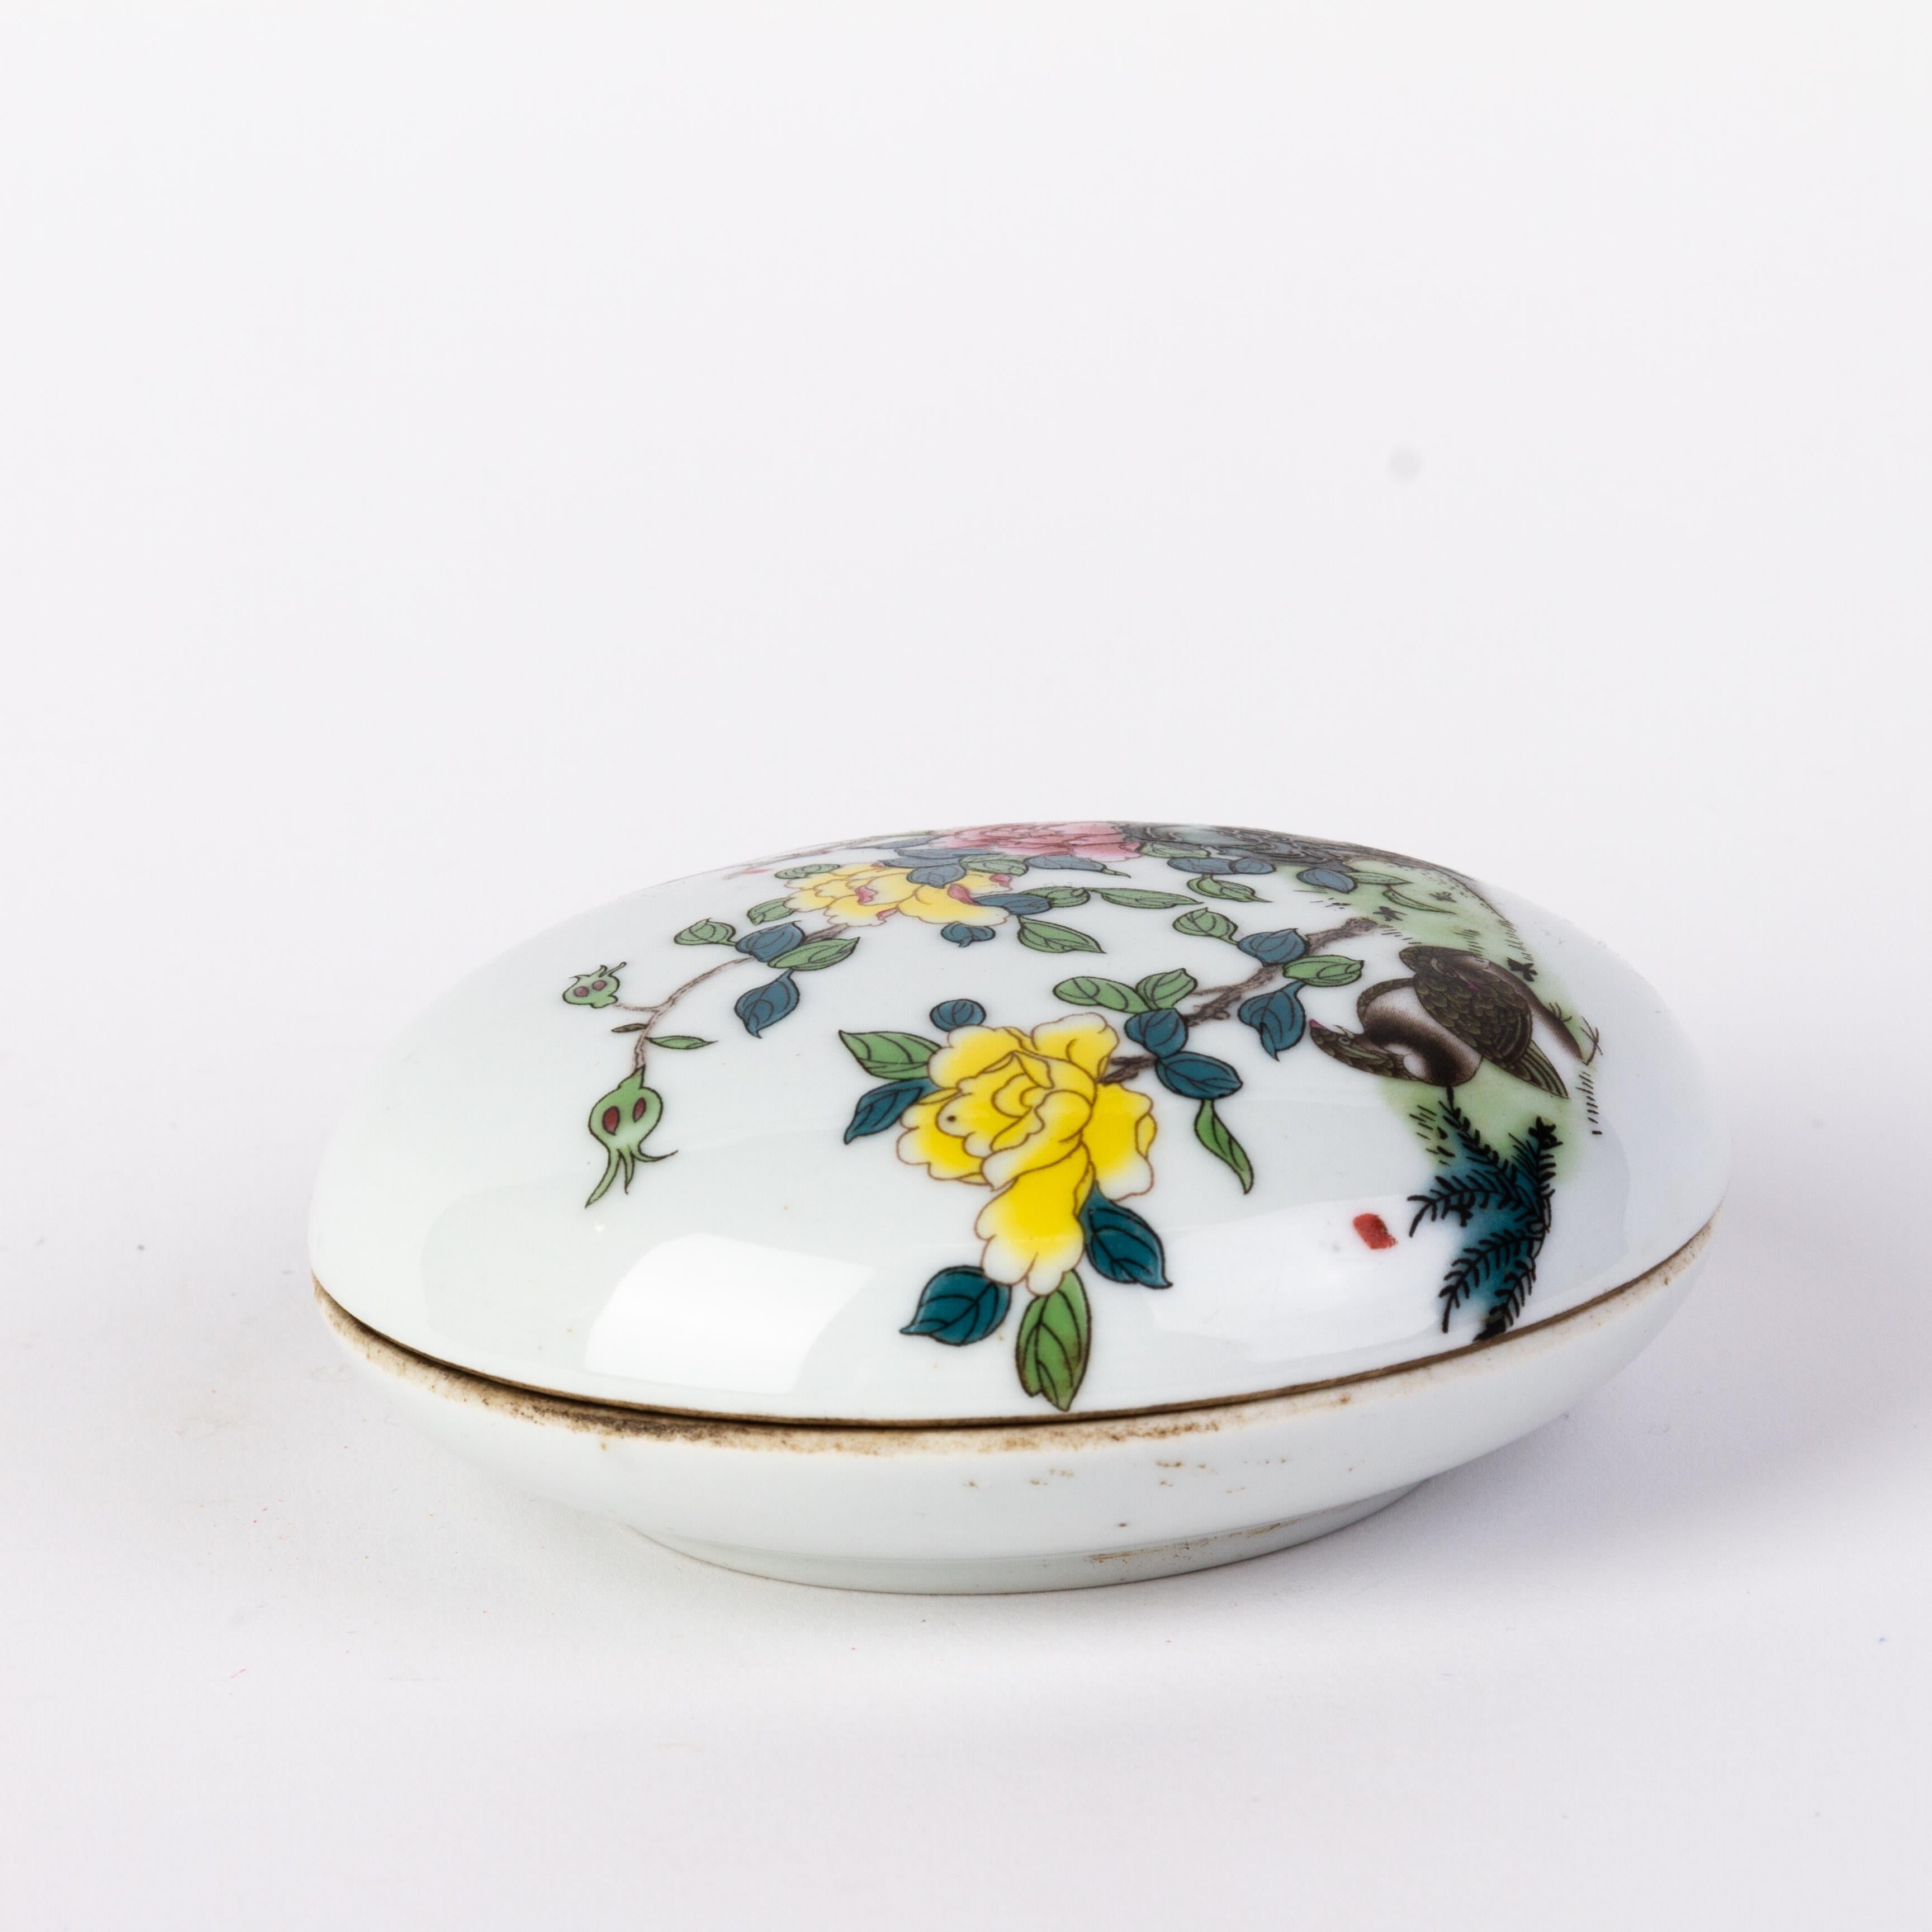 Chinese Republic Period Blossoms Porcelain Lidded Box 
Good condition 
From a private collection.
Free international shipping.